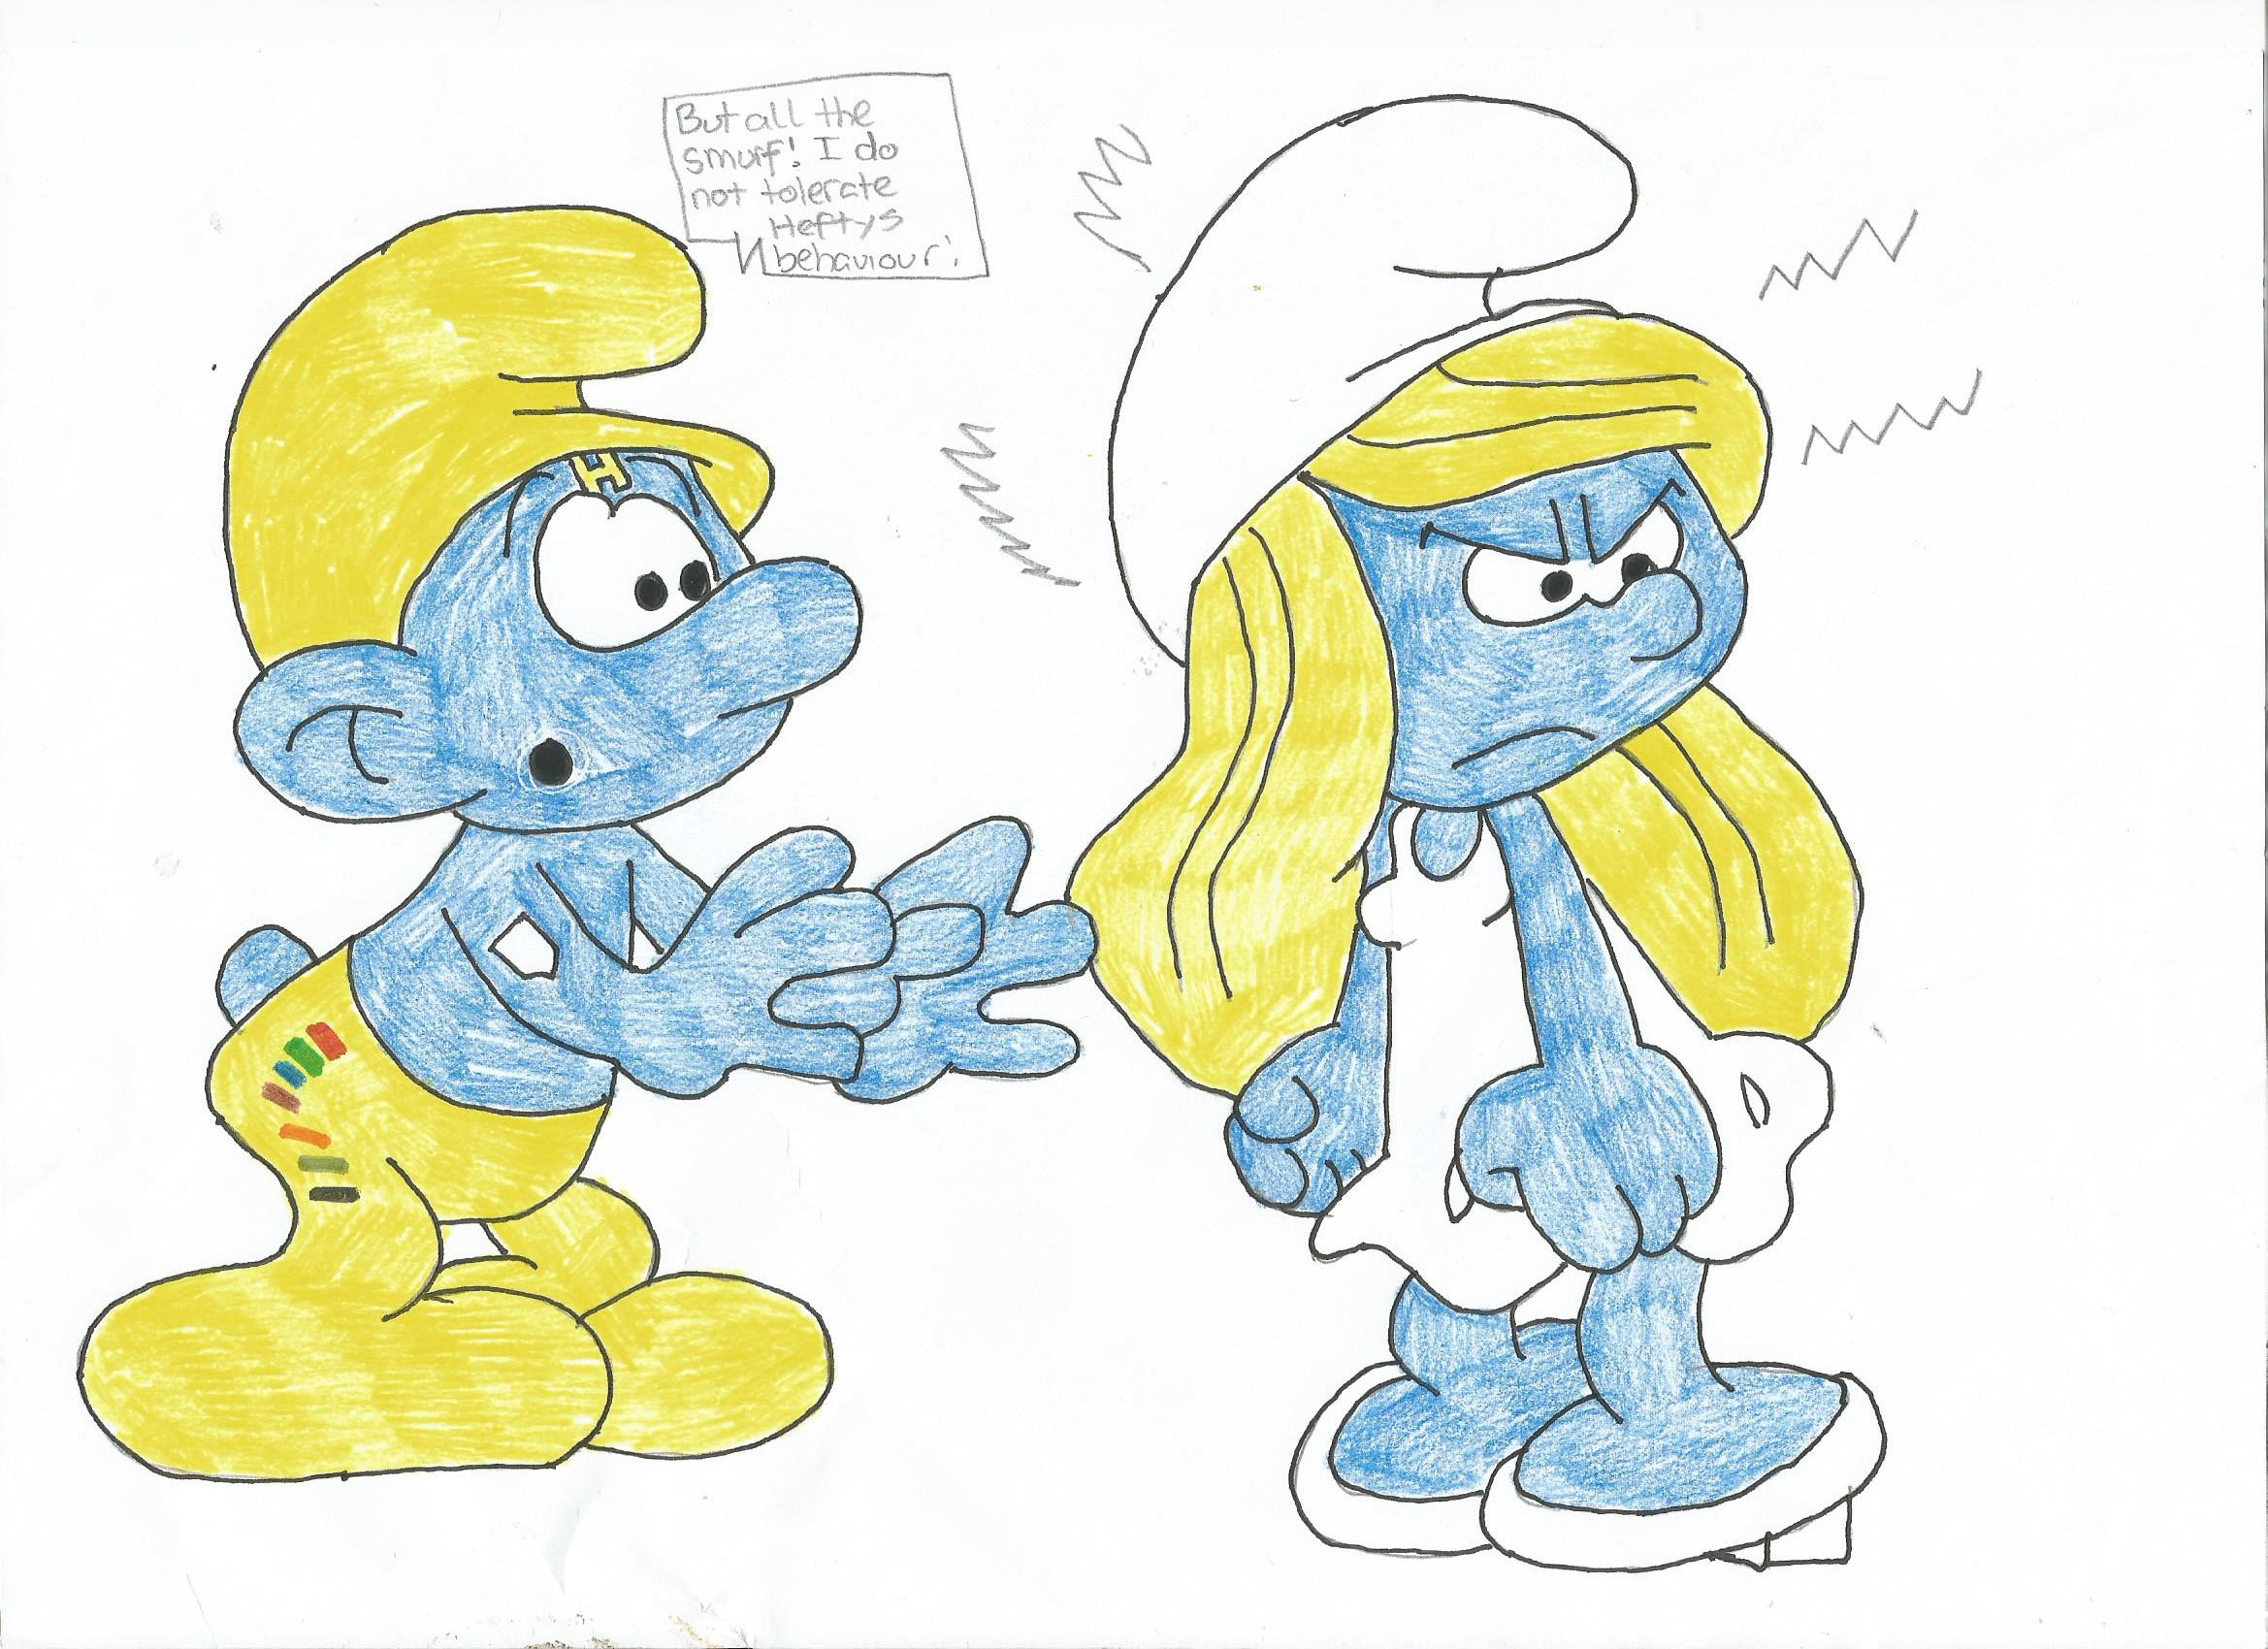 Image Angry Smurfette 2jpg Smurfs Fanon Wiki.